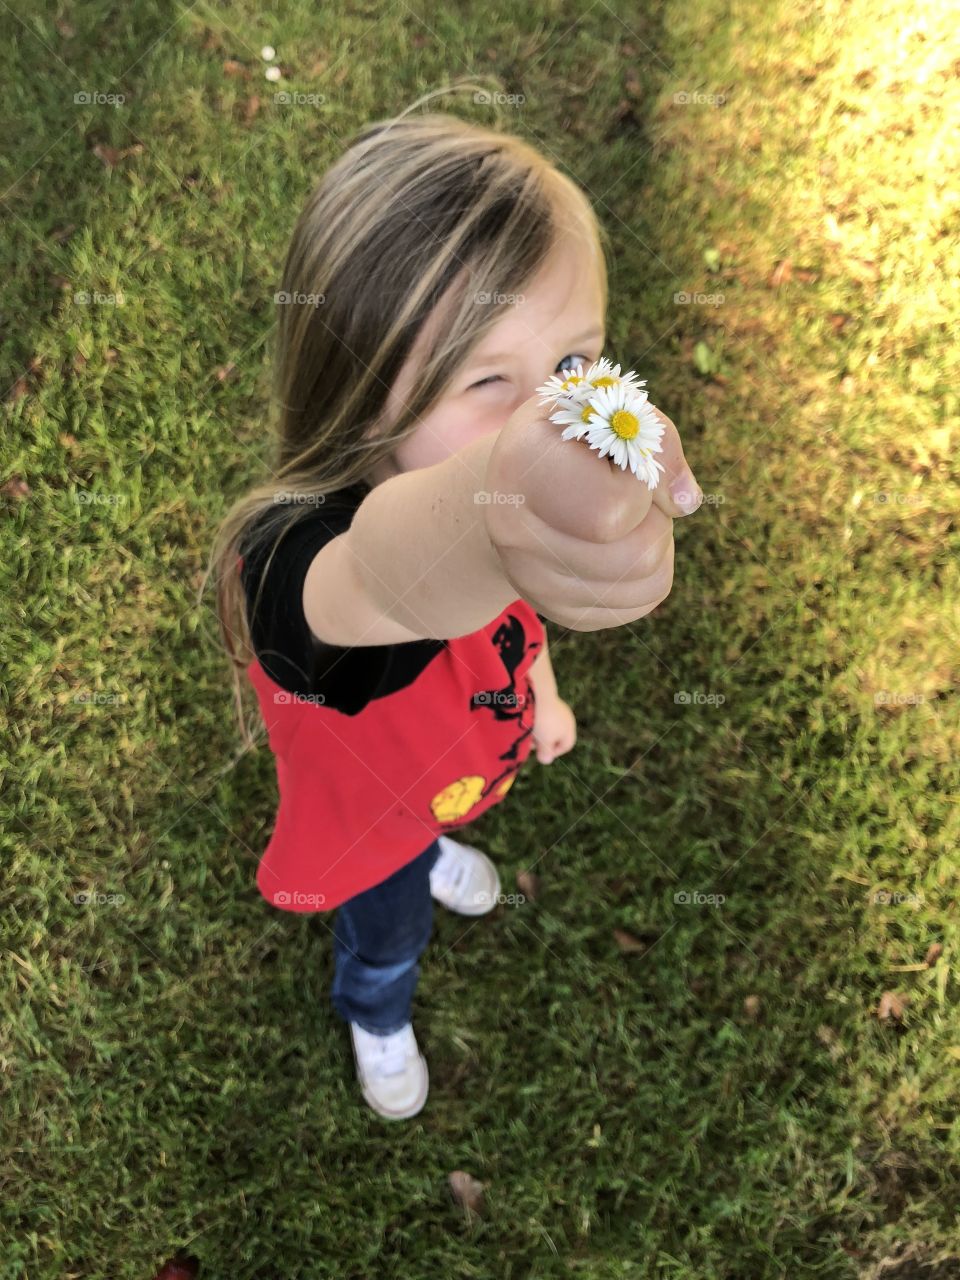 Little blue eyed girl with long blond hair stopping to show a handful of daisies